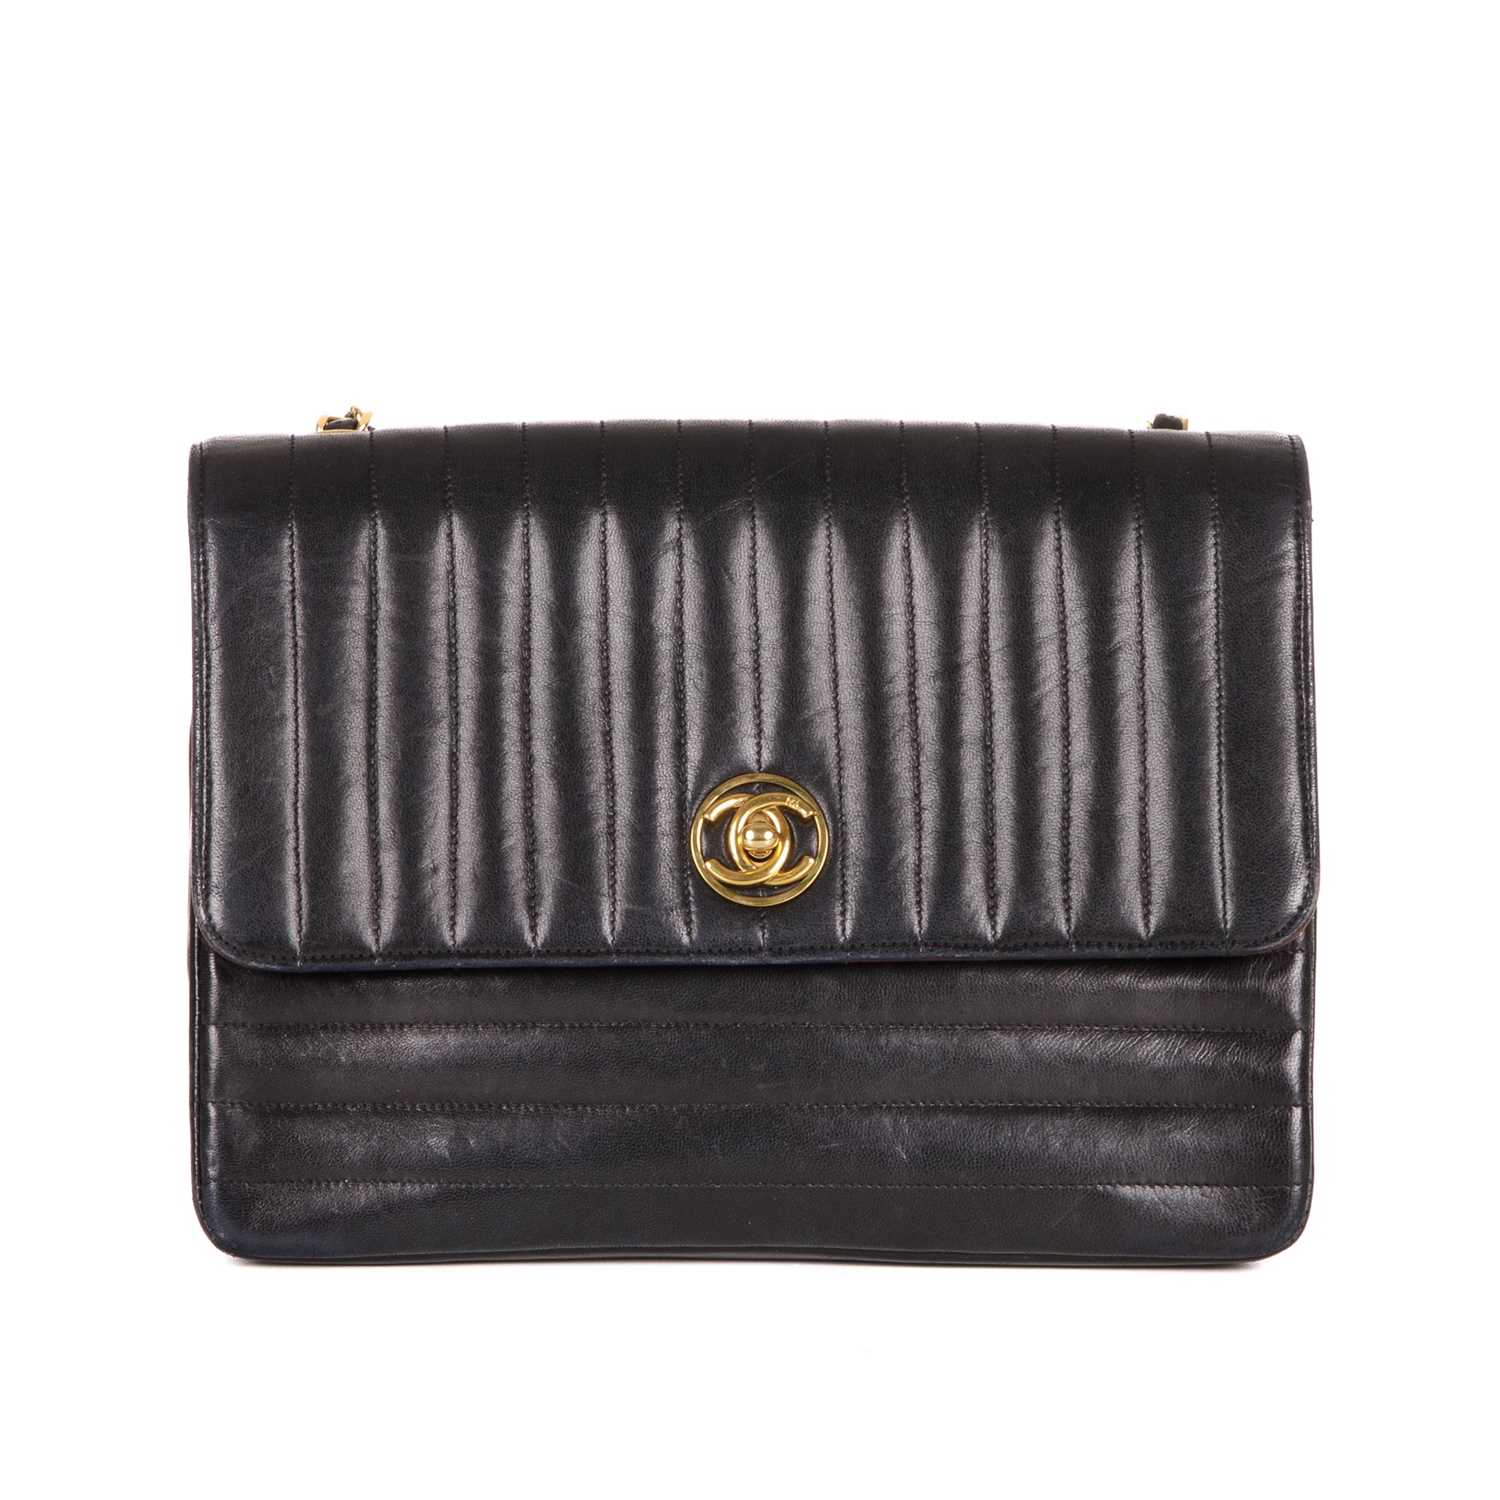 Chanel, a vintage quilted Single Flap handbag, featuring a vertical quilted black lambskin leather